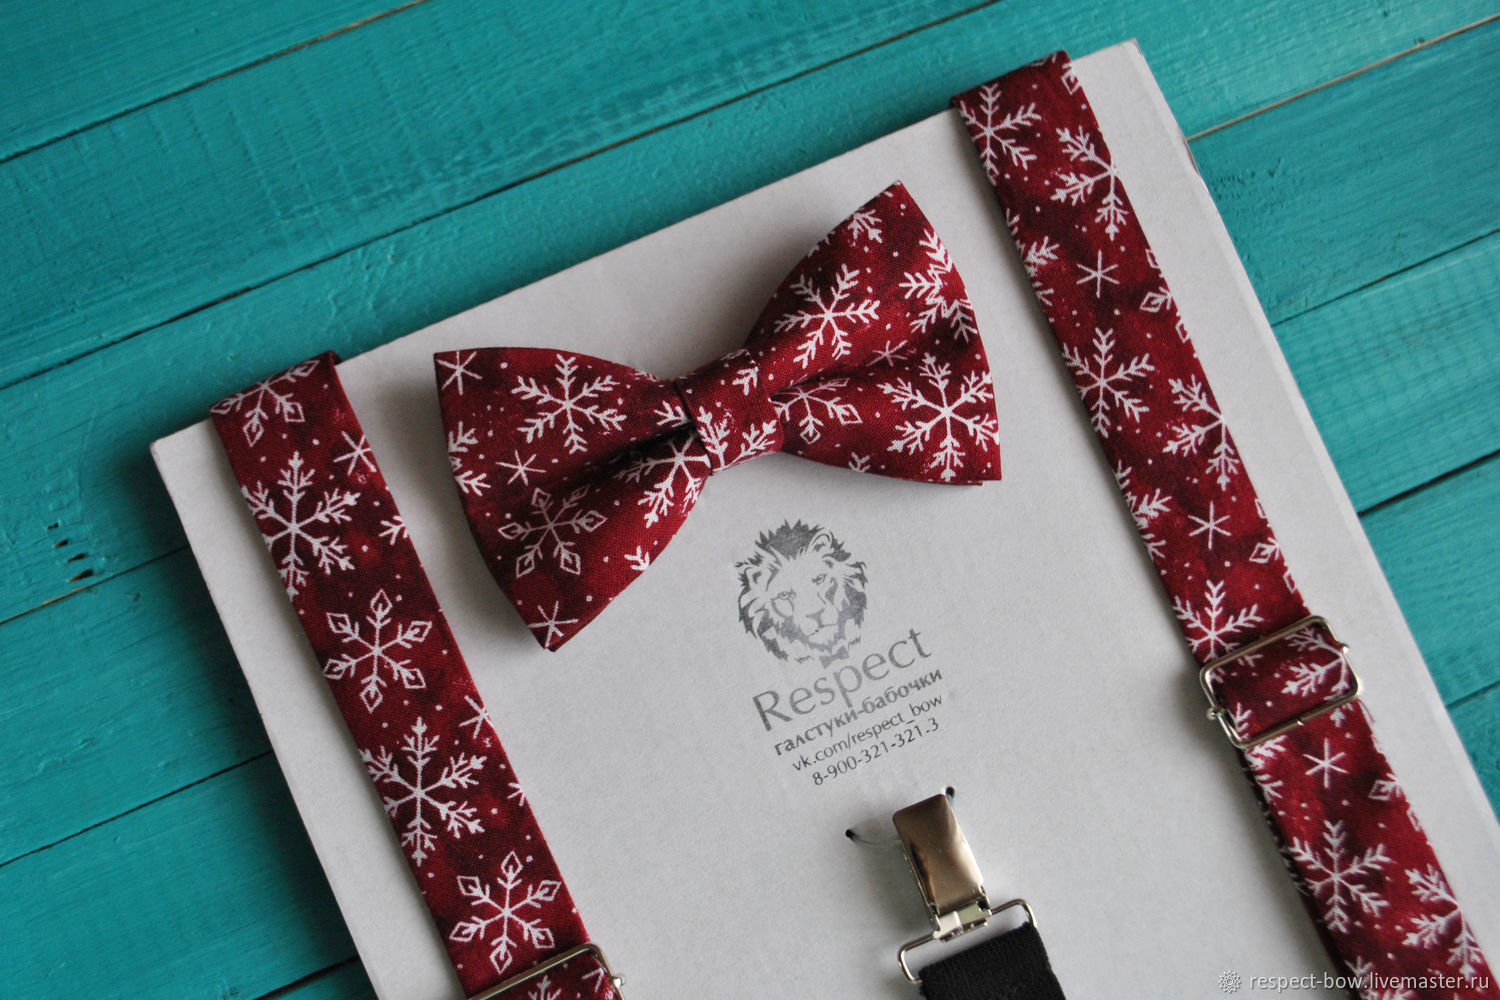 Bow tie and suspenders will brighten up any Christmas office party Christmas party Your son